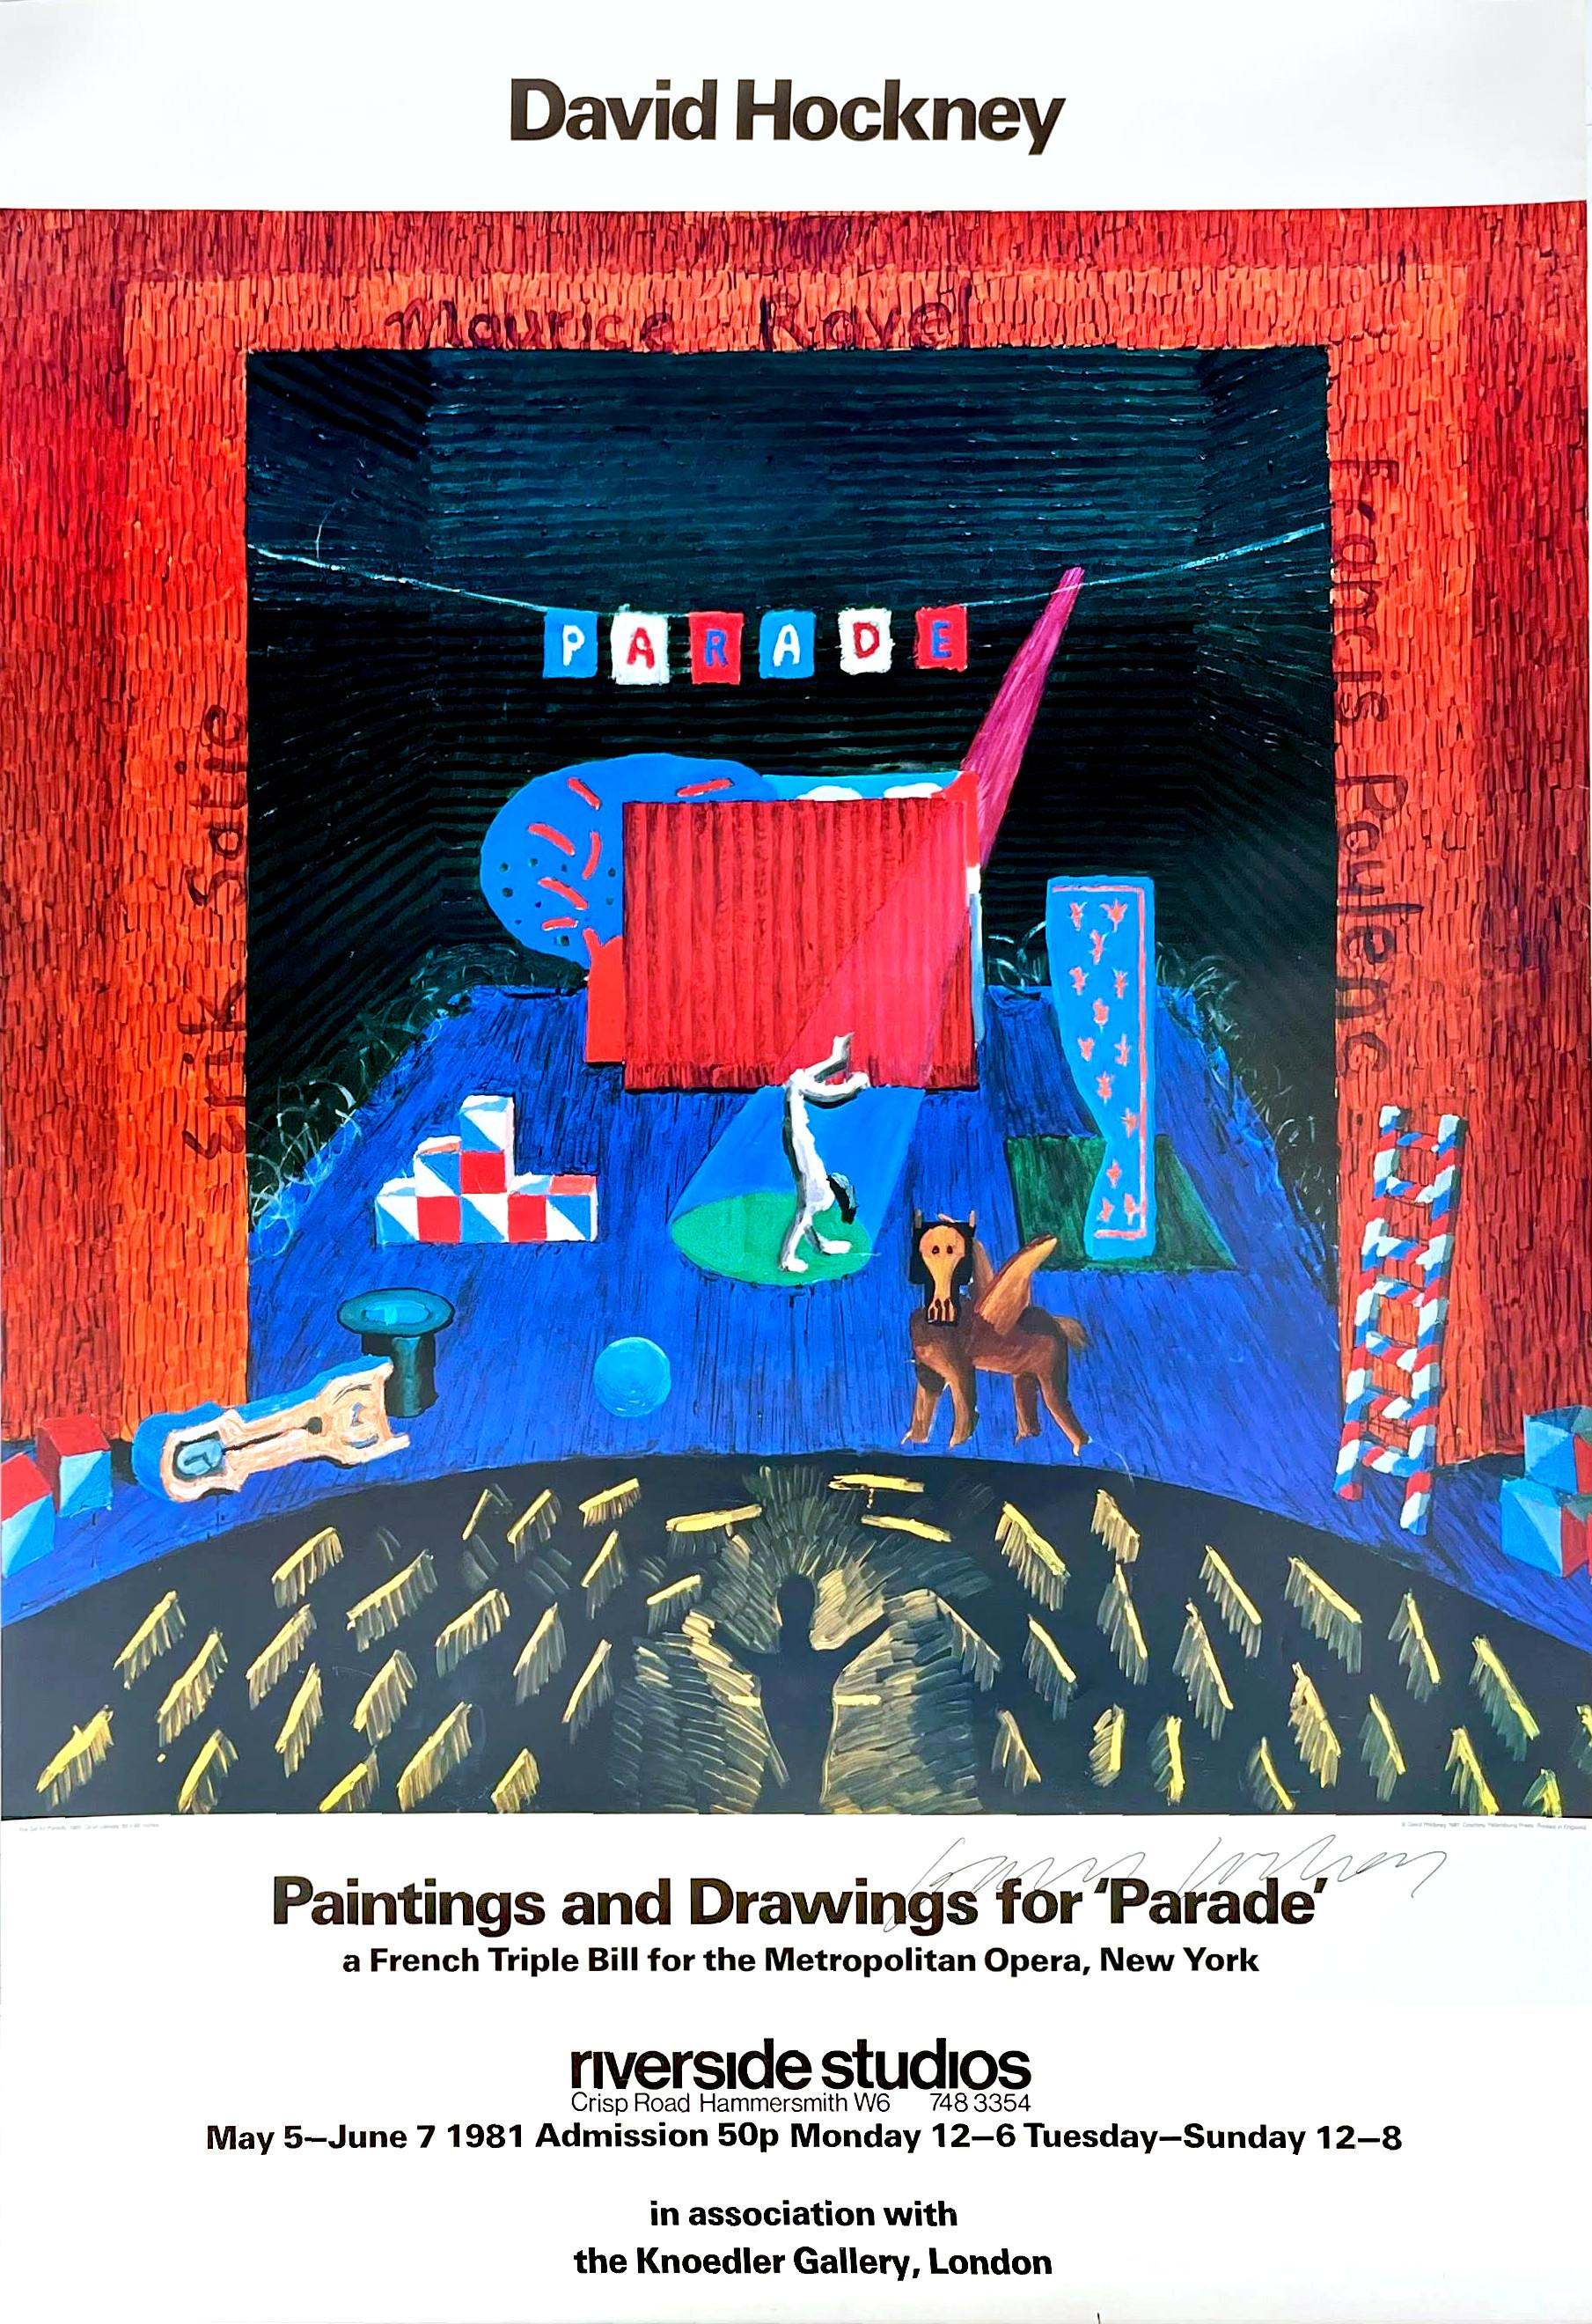 Paintings and Drawings for Parade poster (Hand Signed by David Hockney)